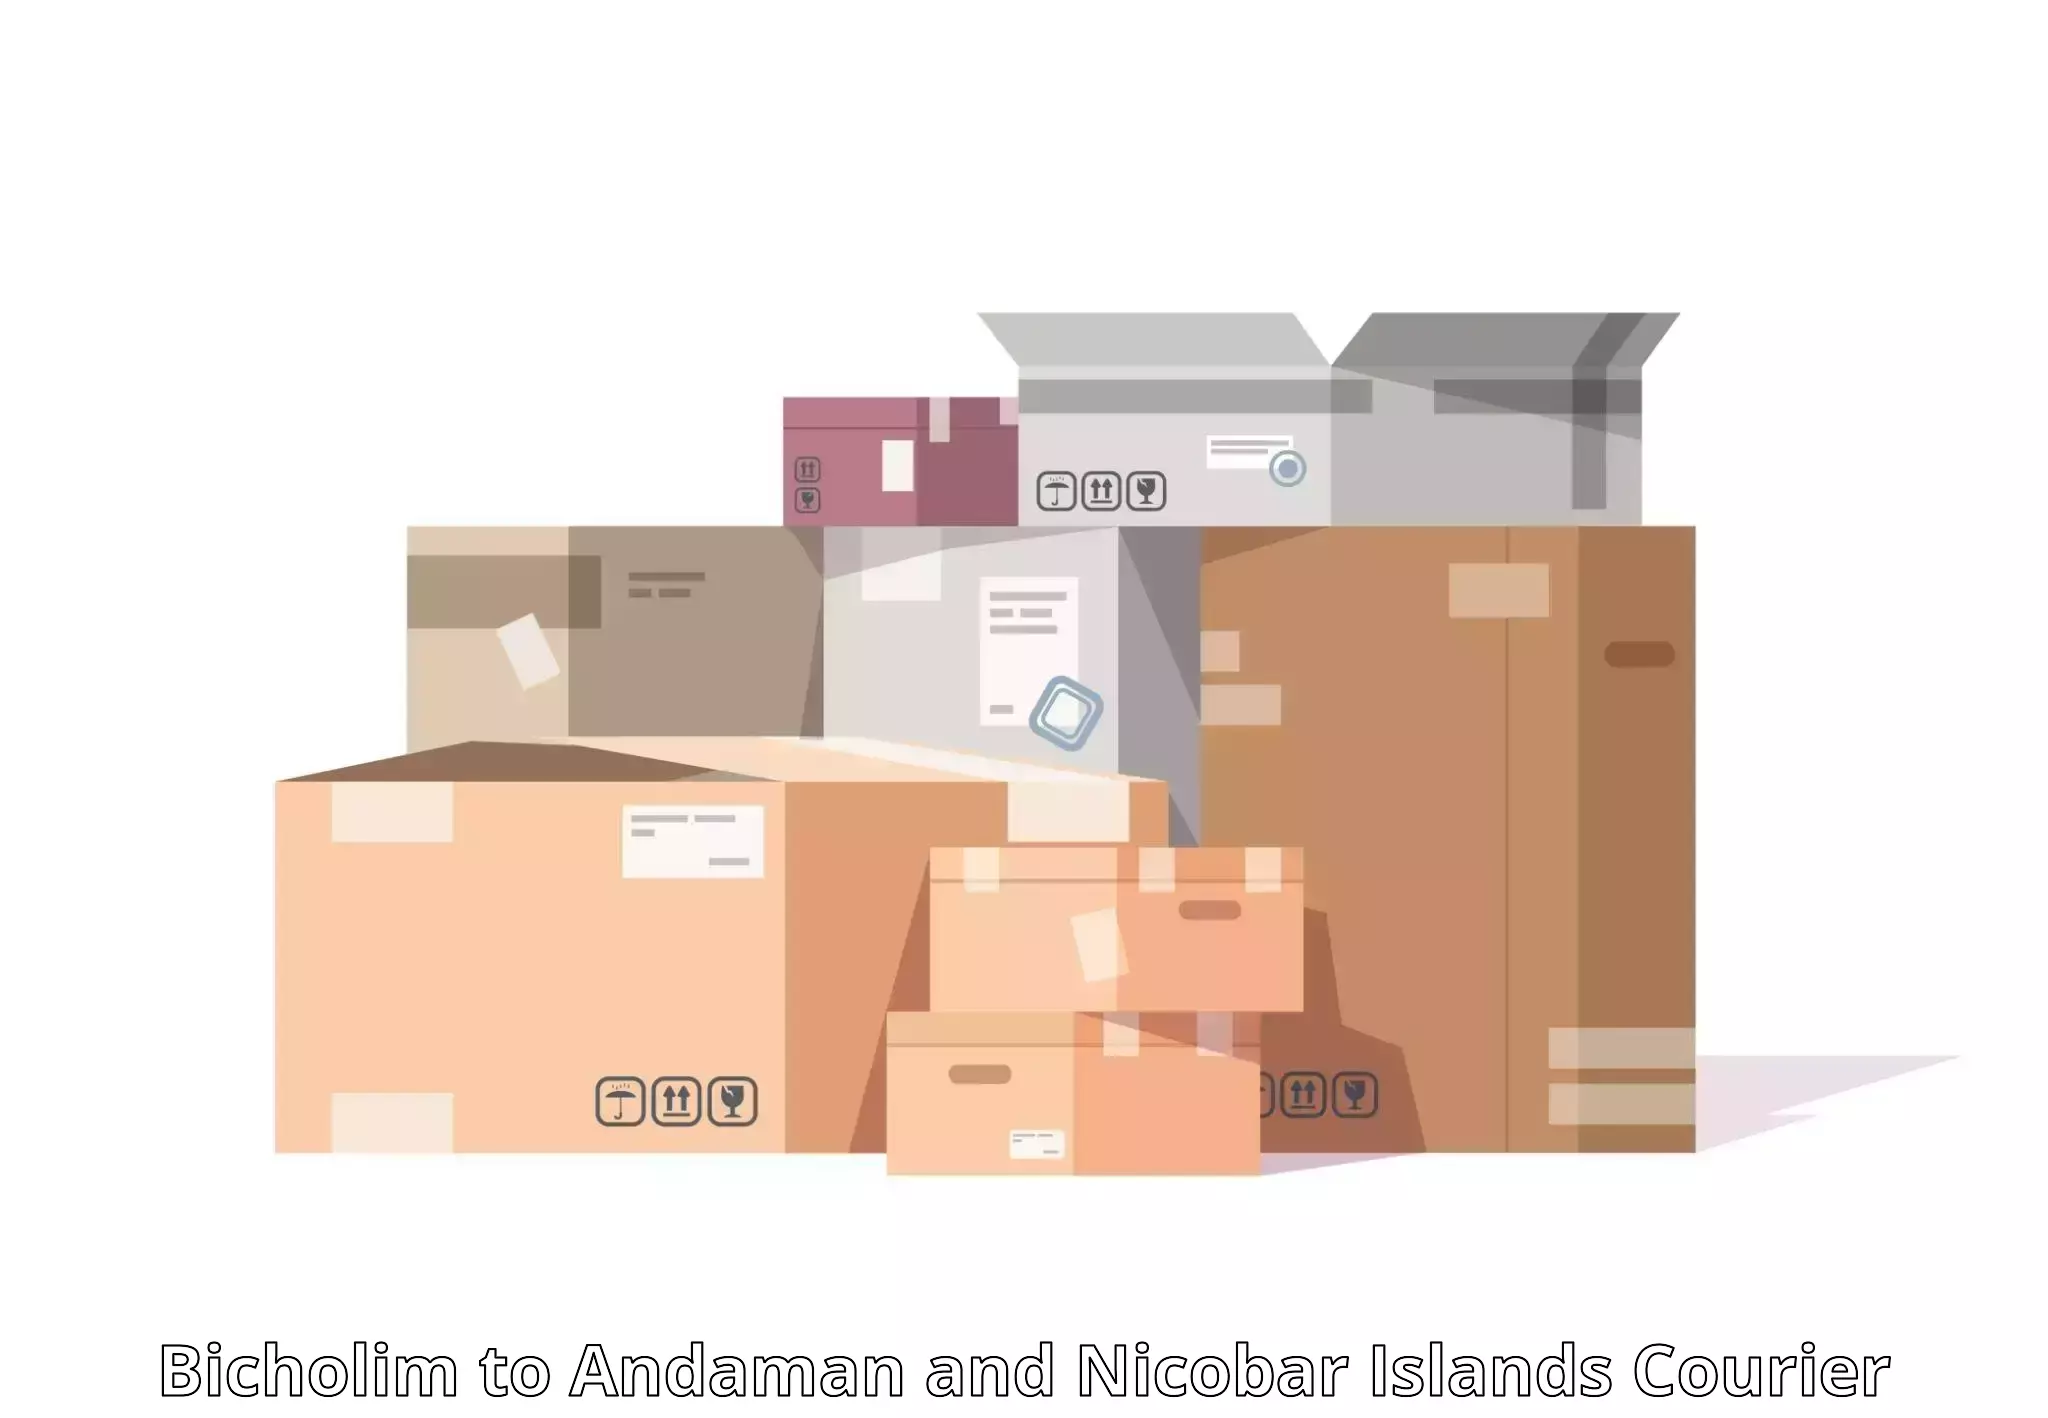 Nationwide courier service Bicholim to Andaman and Nicobar Islands